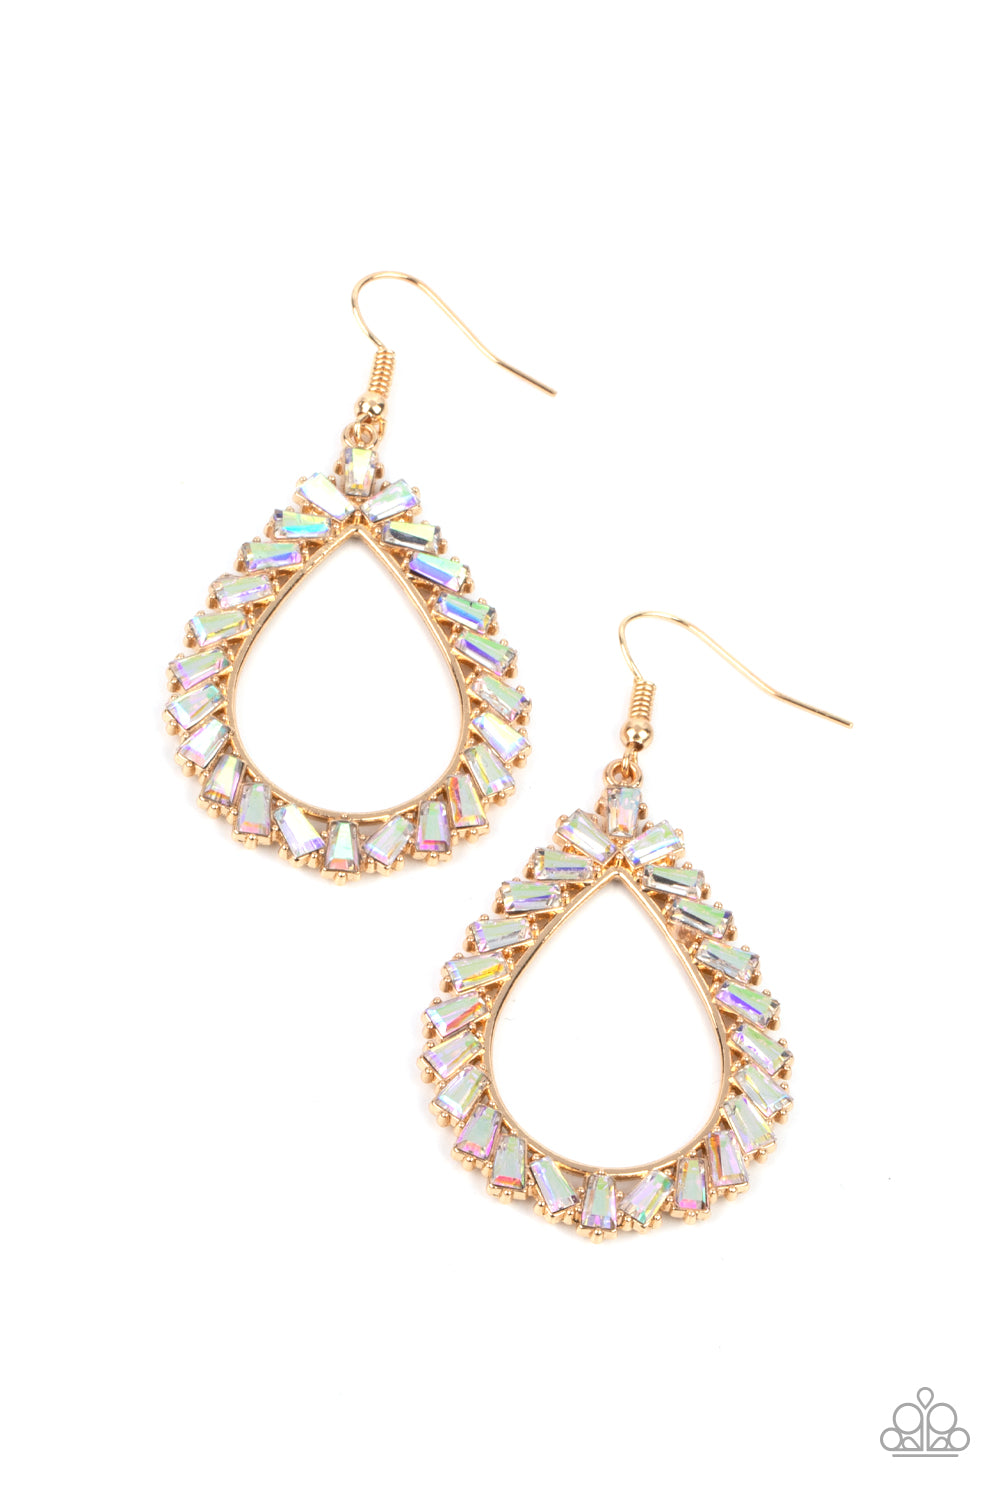 Stay Sharp - Gold Iridescent Gems Earrings featuring flared emerald style cuts, a glittery collection of iridescent gems adorn the front of a gold teardrop for a jaw-dropping dazzle. Earring attaches to a standard fishhook fitting.  Sold as one pair of earrings.